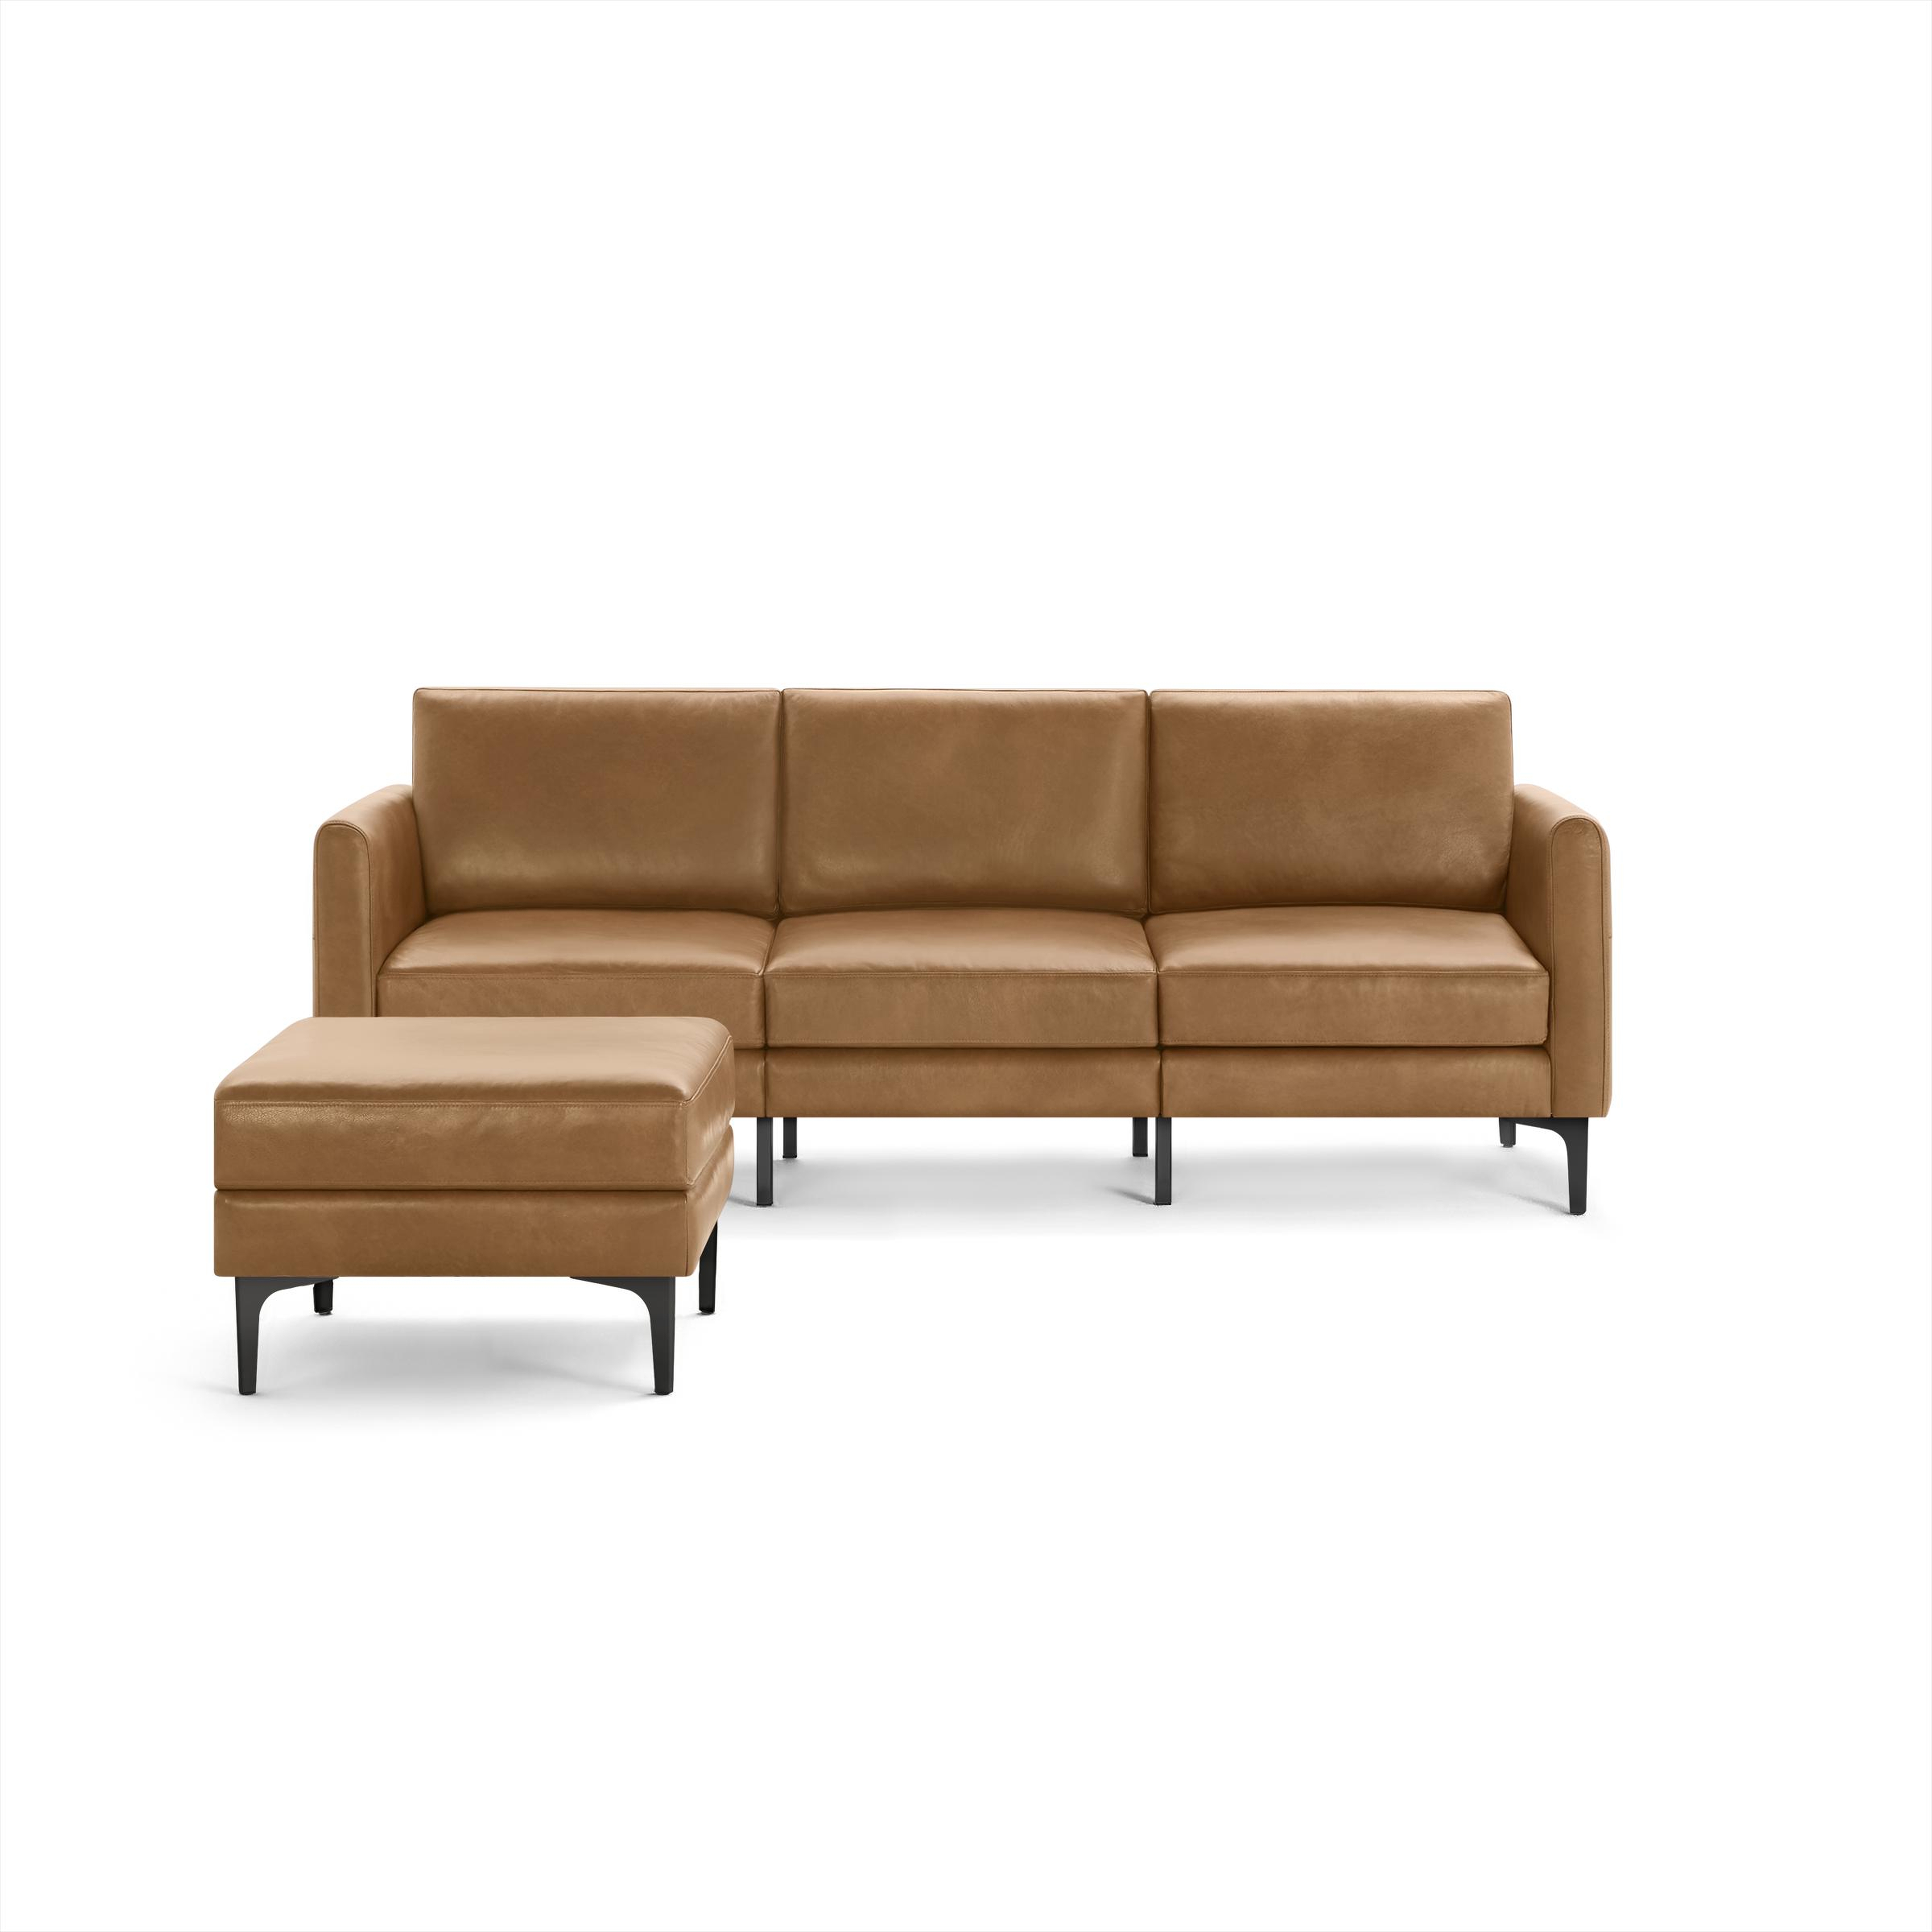 Nomad Leather Sofa and Ottoman in Camel - Burrow